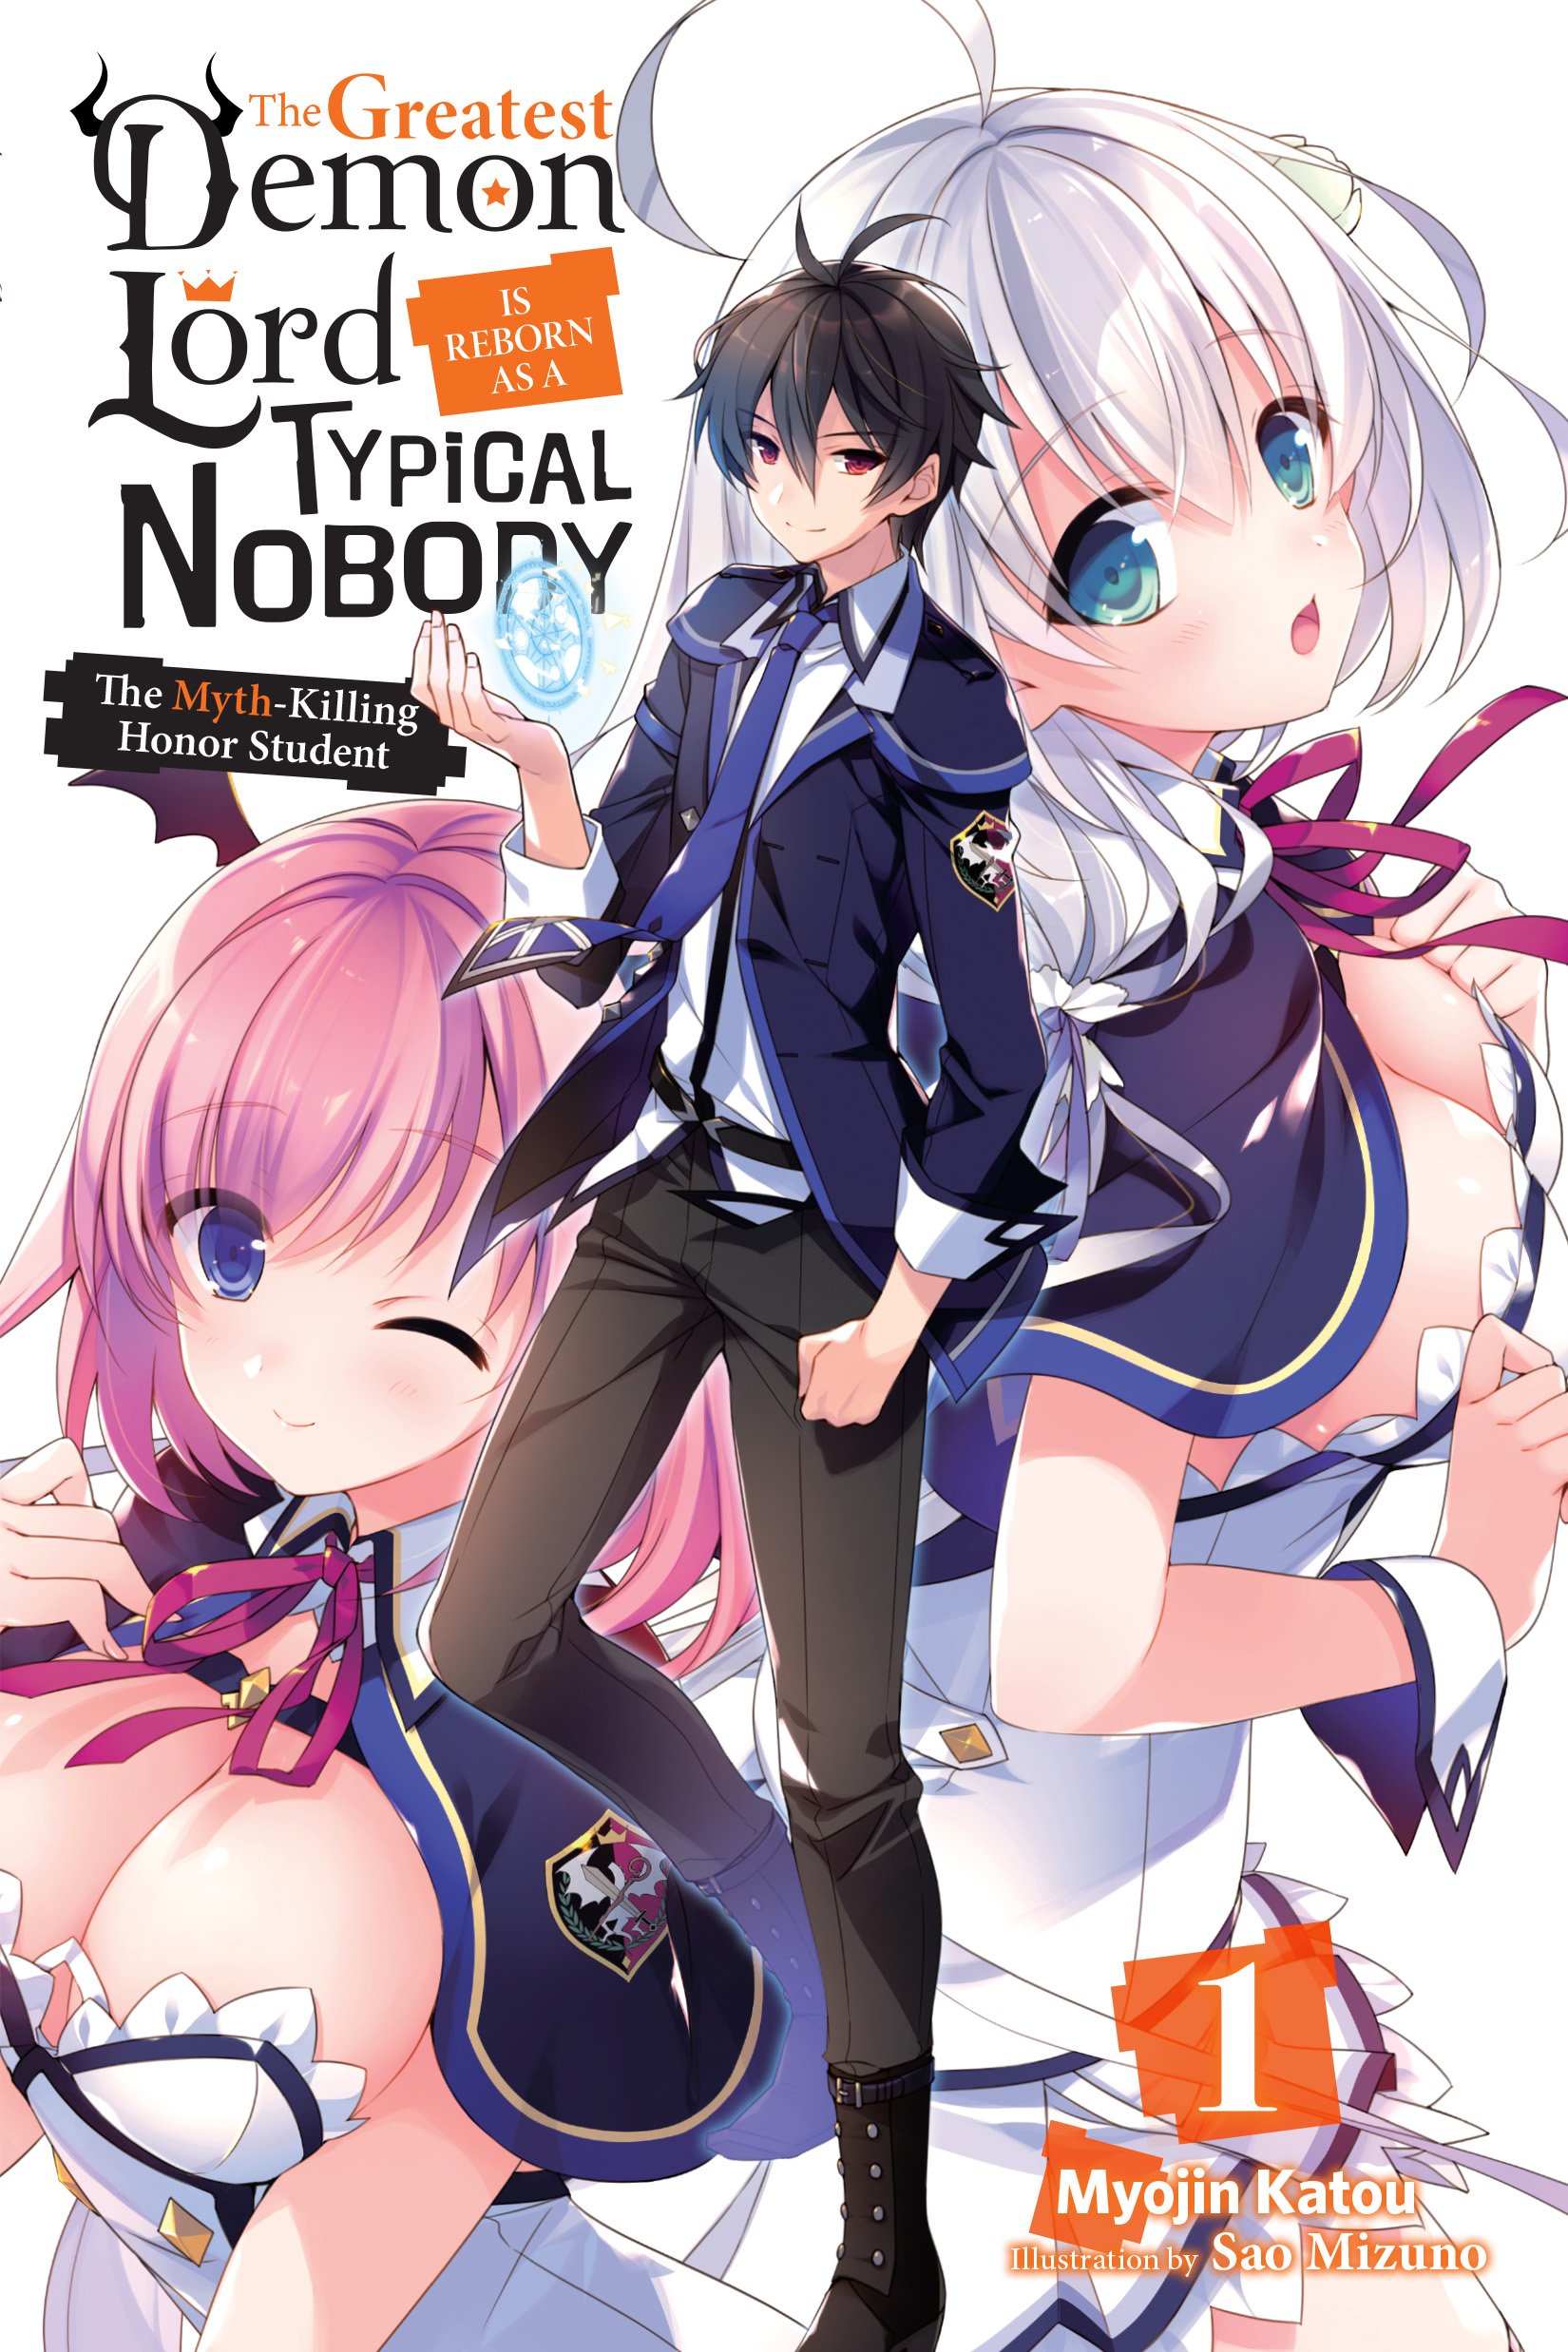 The Greatest Demon Lord Is Reborn as a Typical Nobody - Volume 1